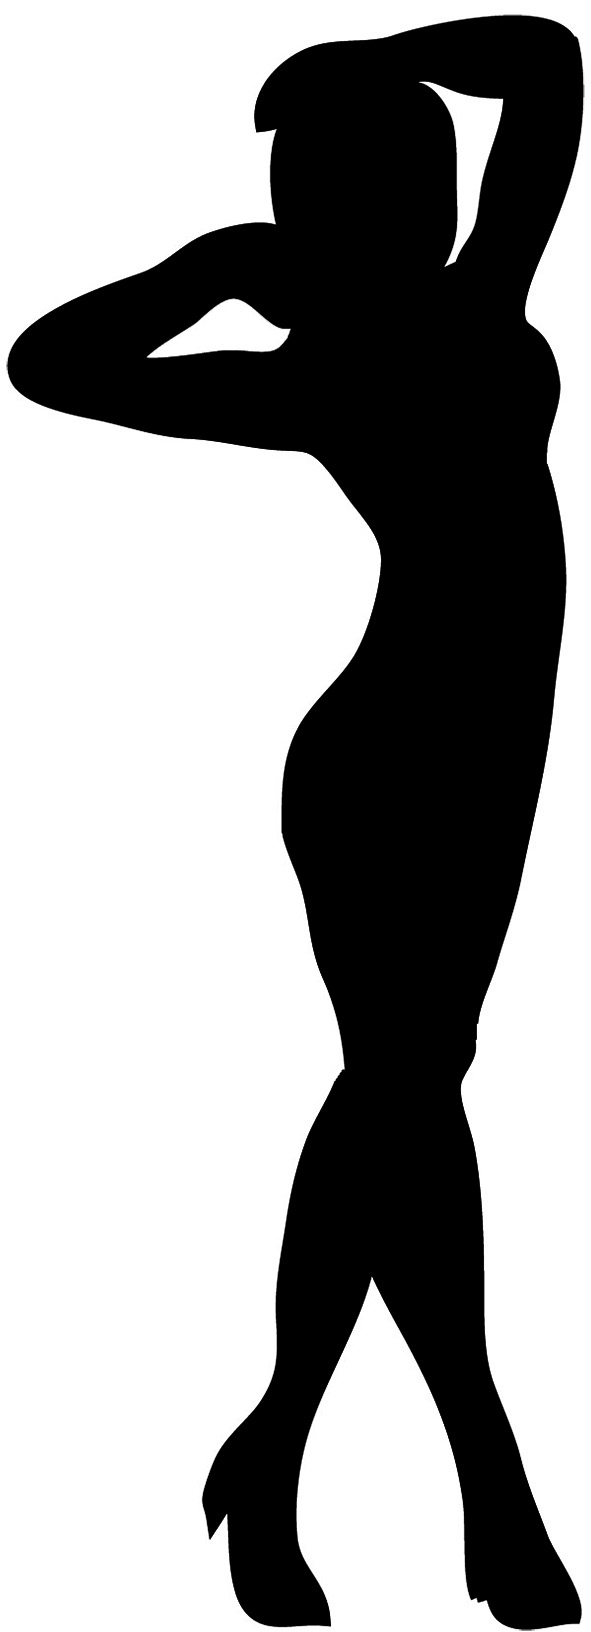 Female Silhouette Silhouette With Outline Black Outline Silhouette